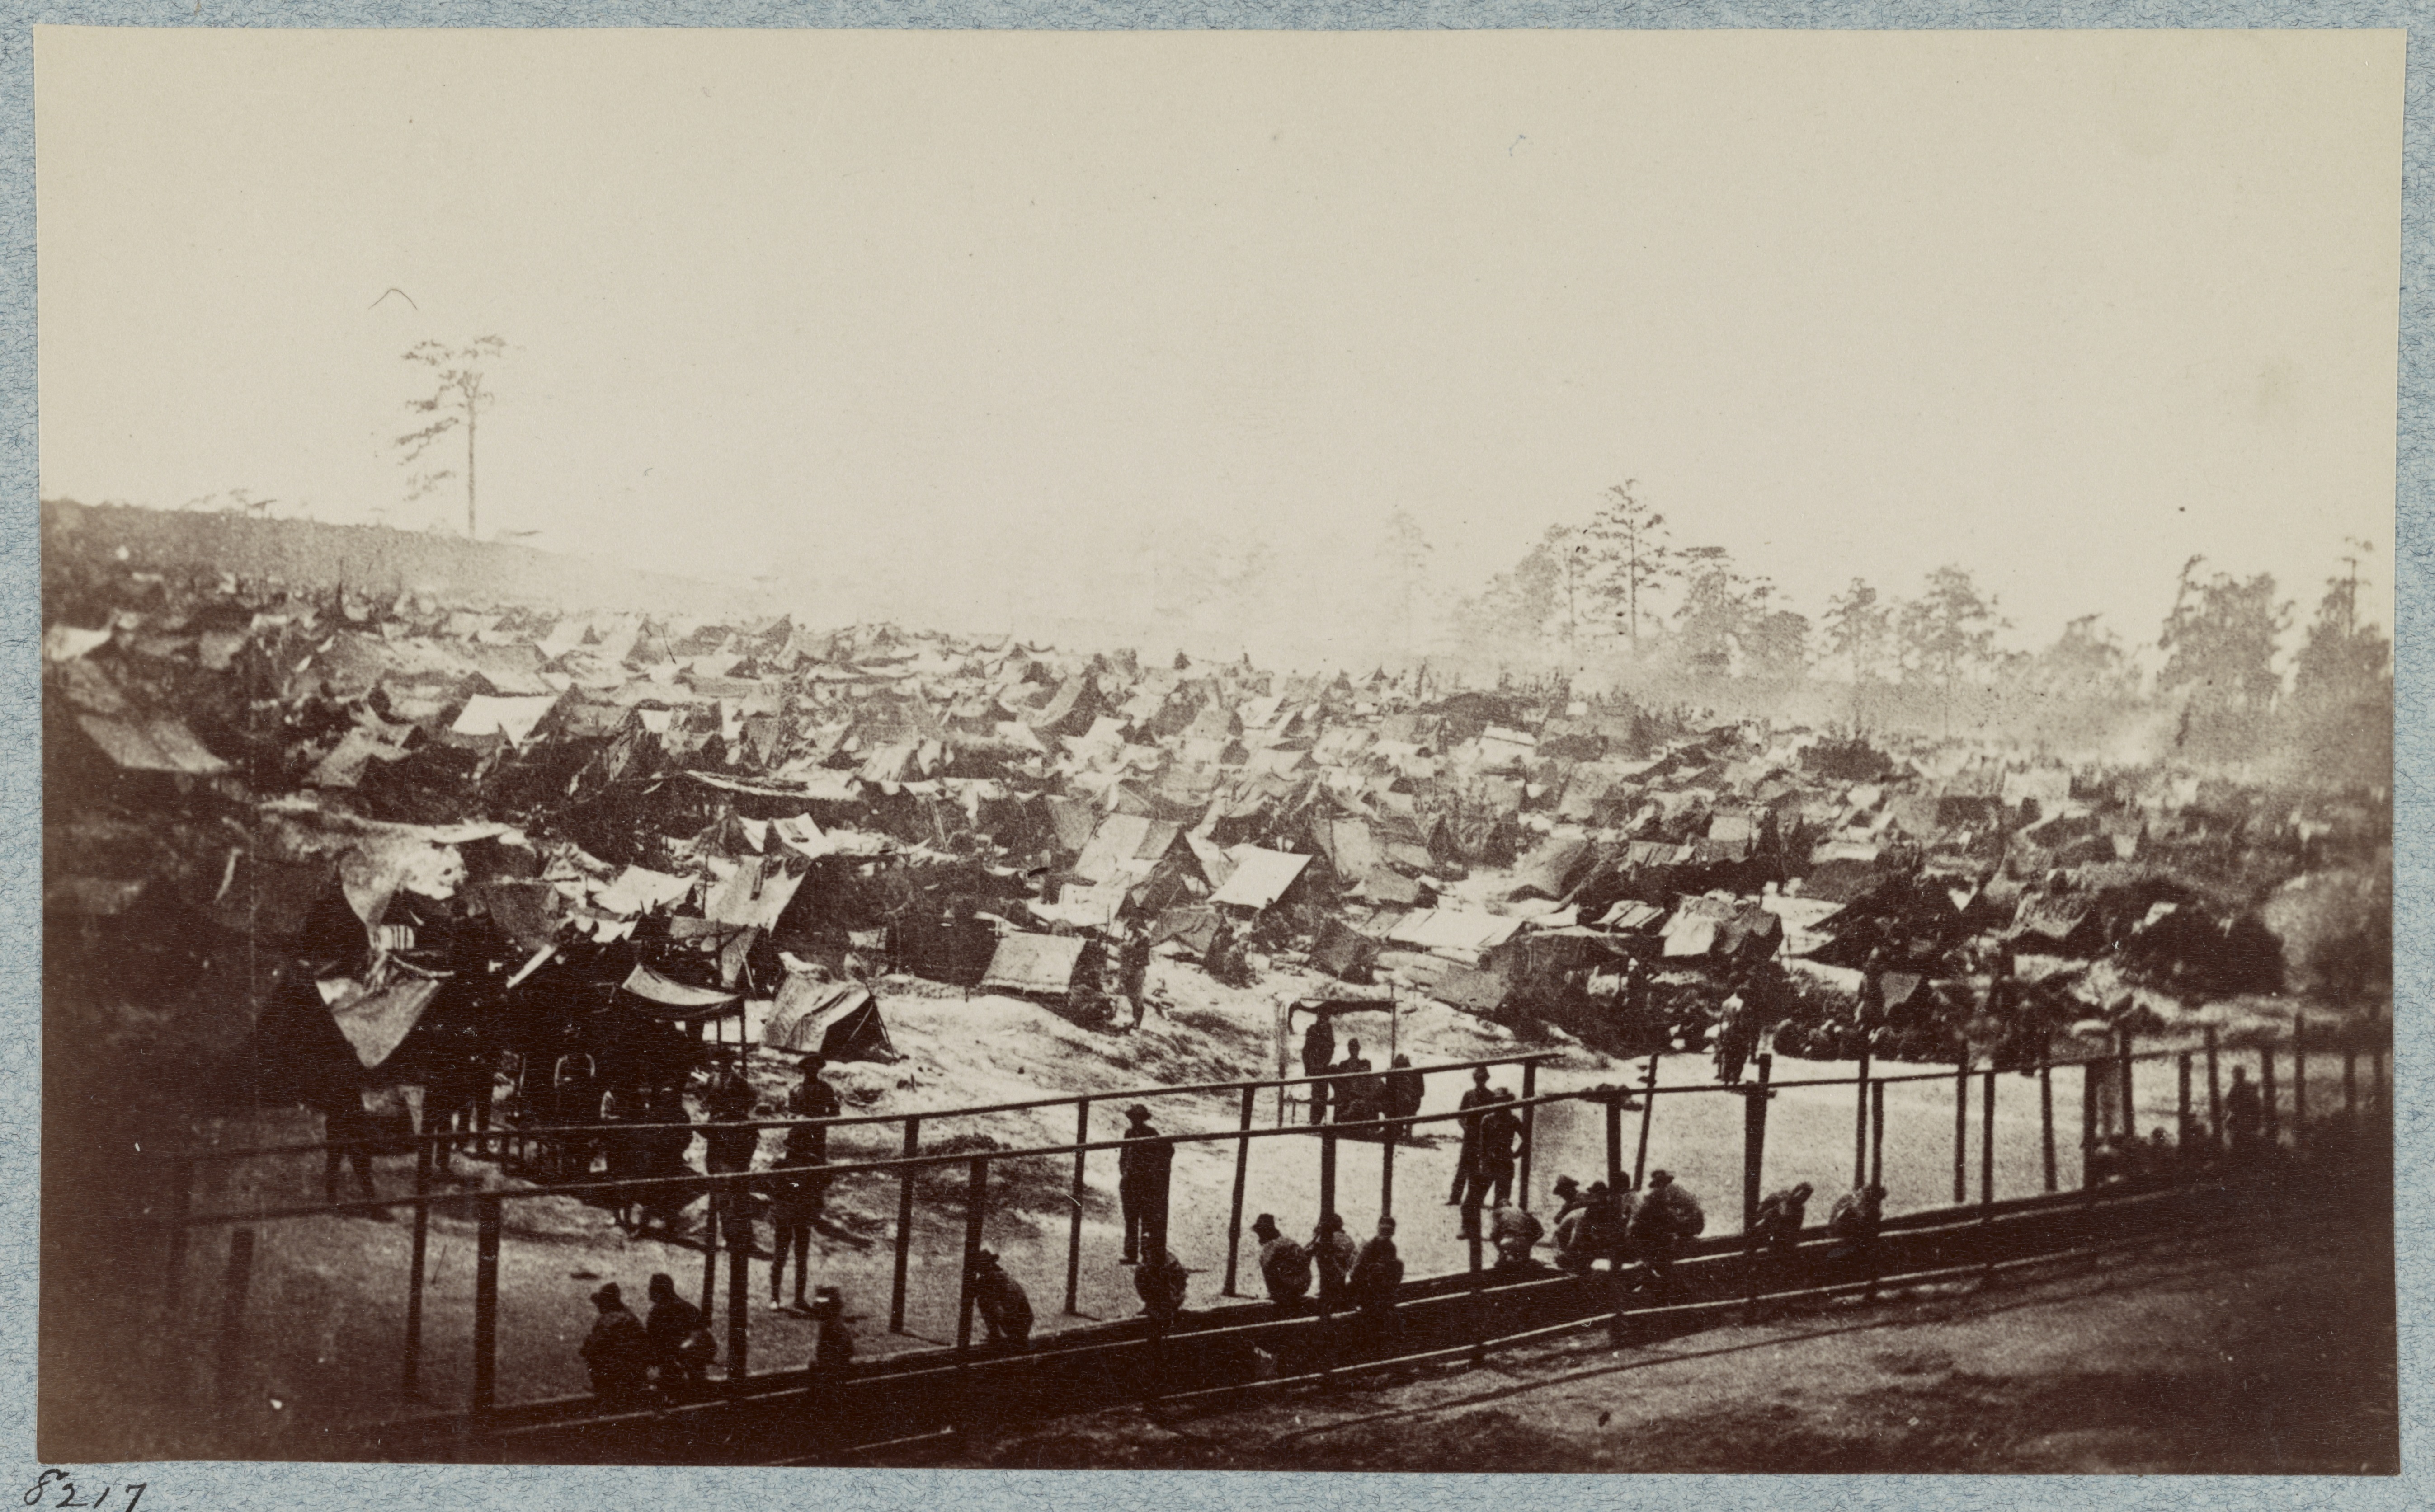 When Andrew J. Riddle photographed the prison in 1864, more than 33,000 prisoners were held on 26 acres. Library of Congress 